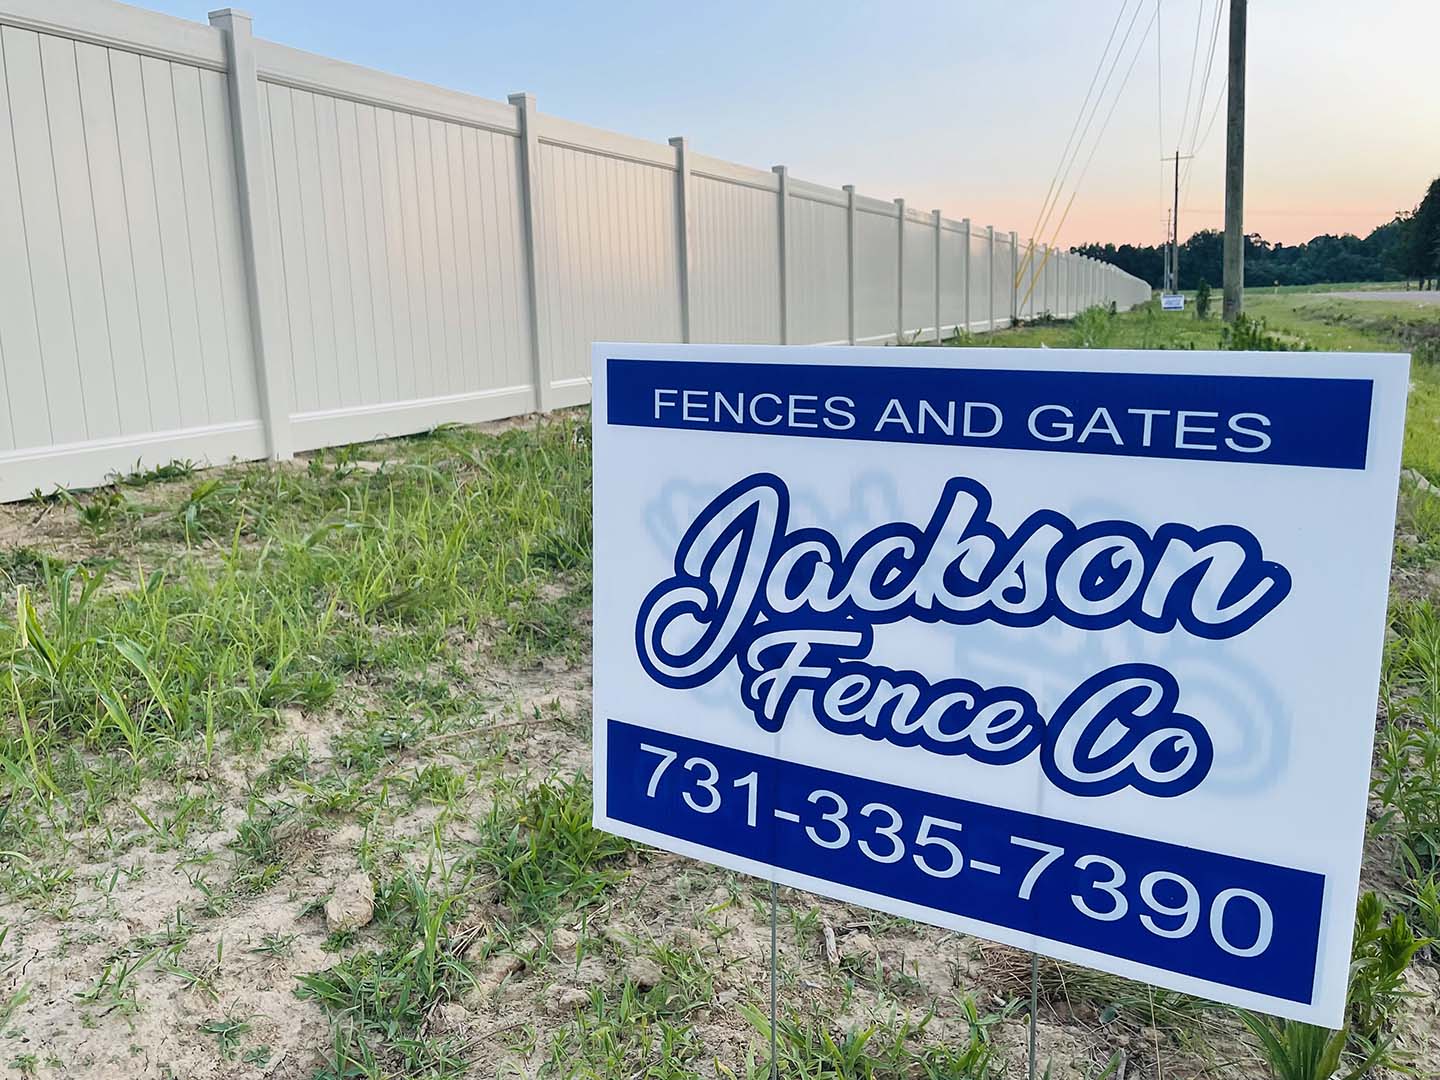 Vinyl Fence in West Tennessee